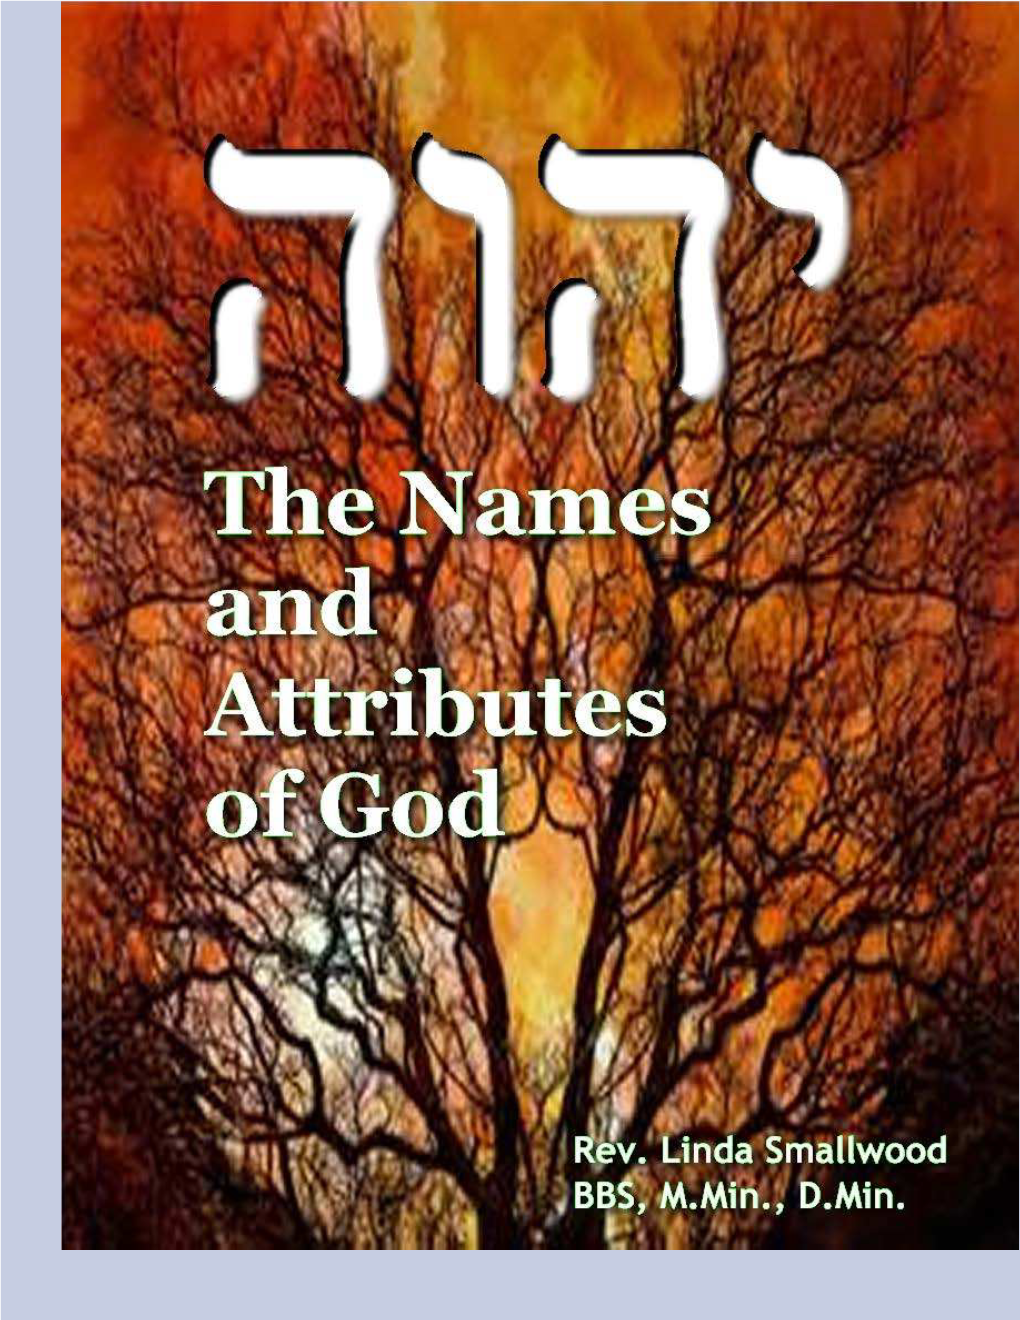 The Names and Attributes of God